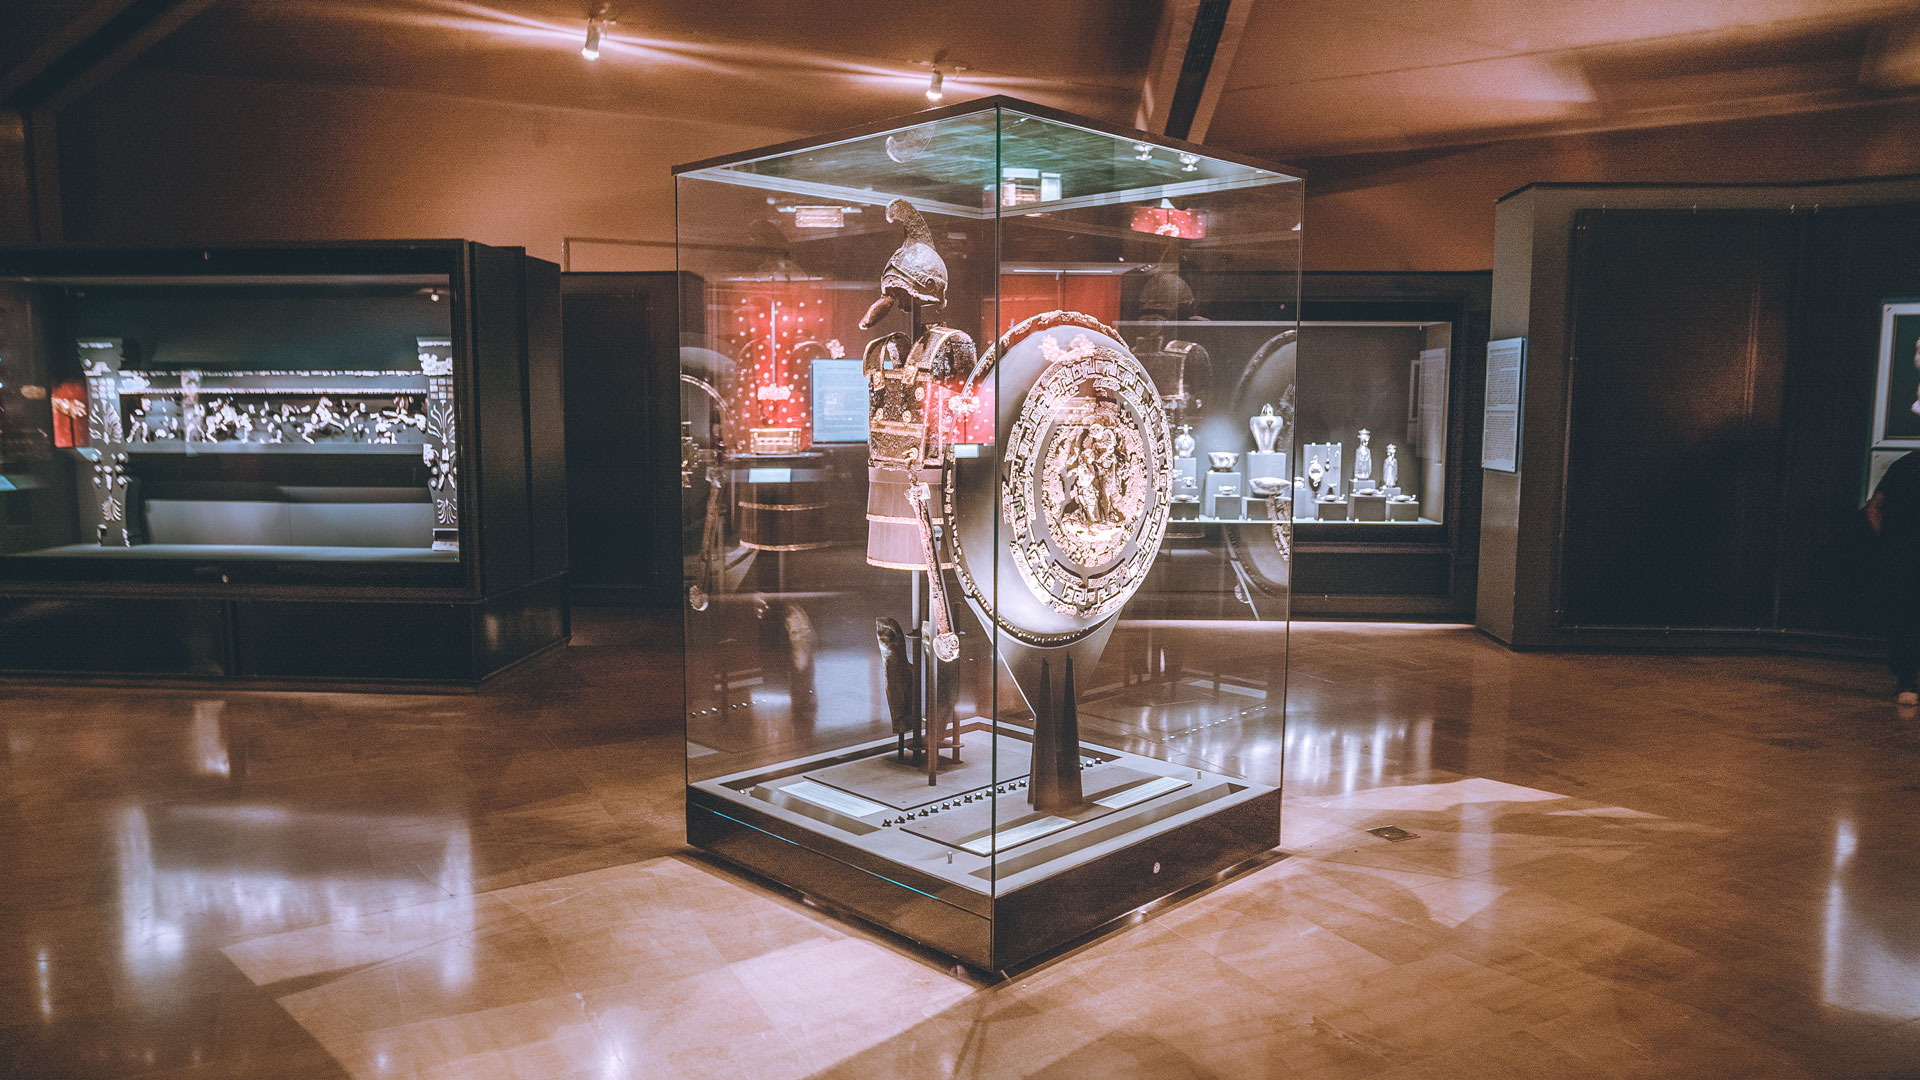 The immense armour of King Philip II, displayed in evocatively dimmed light